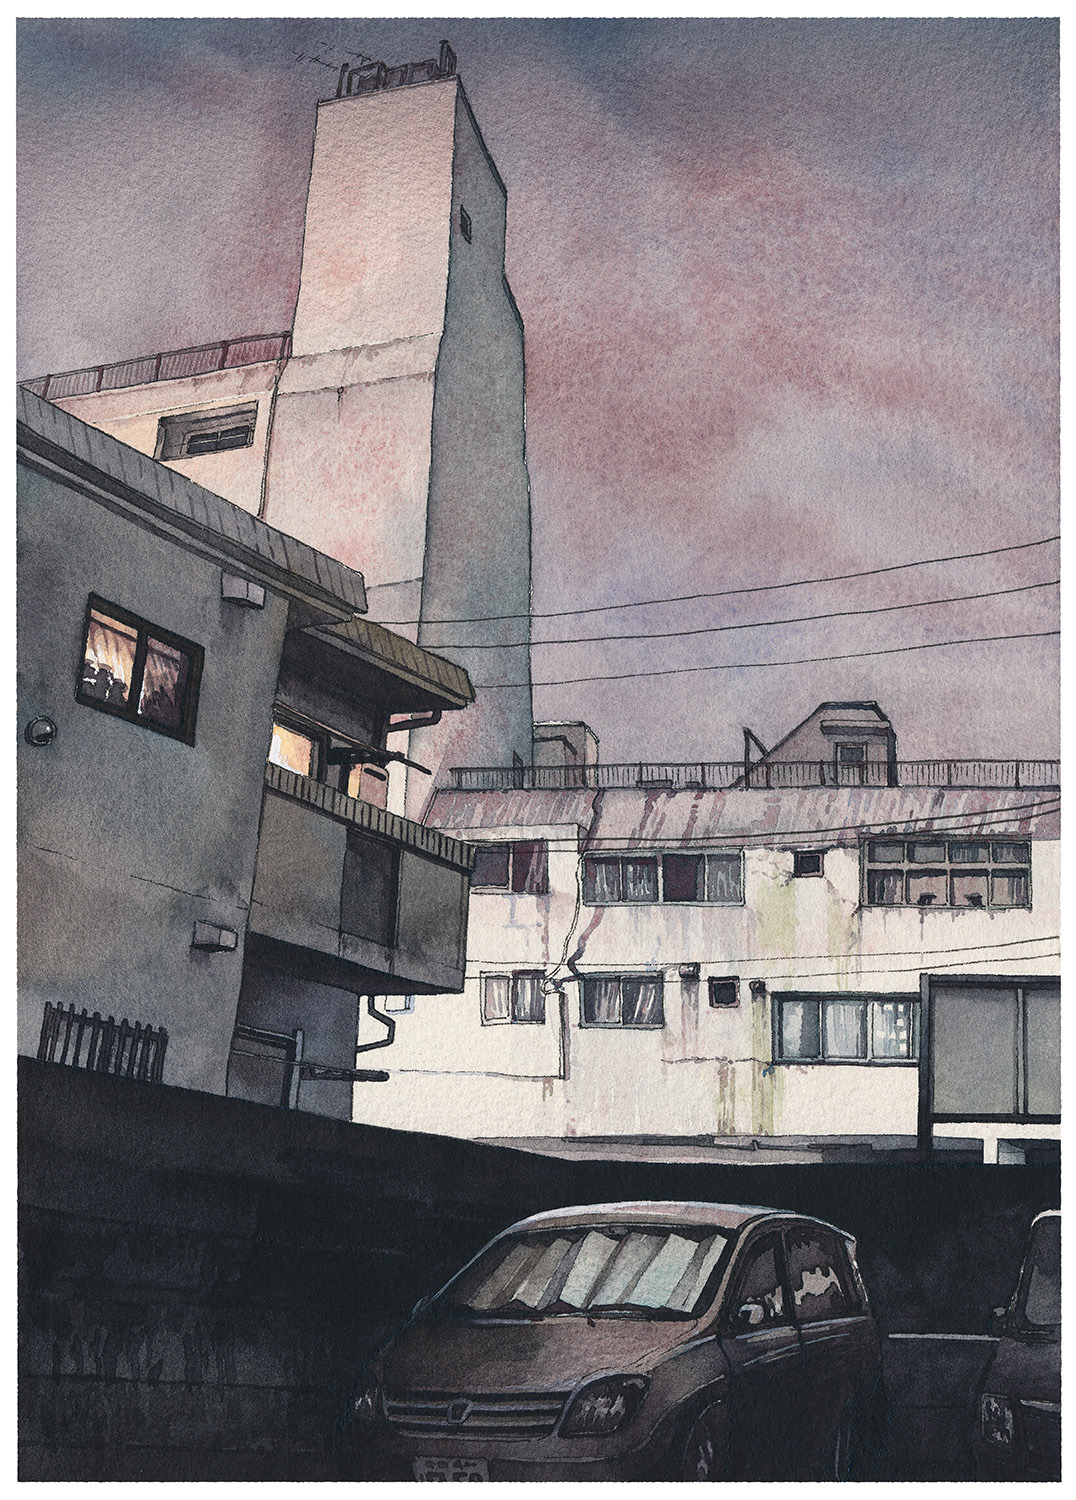 Mateusz Urbanowicz — I wanted to try a new watercolour sketchbook I